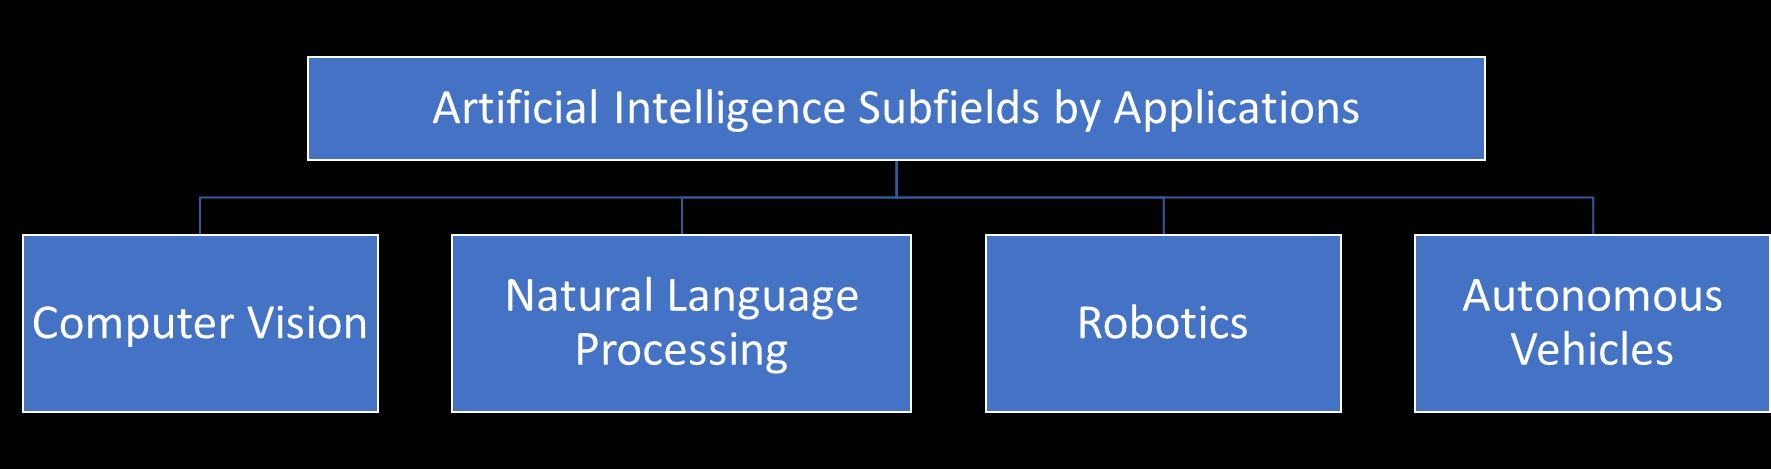 Most common subfields of AI systems based on application functionality: computer vision, natural language processing, robotics/automation, and autonomous vehicles. 